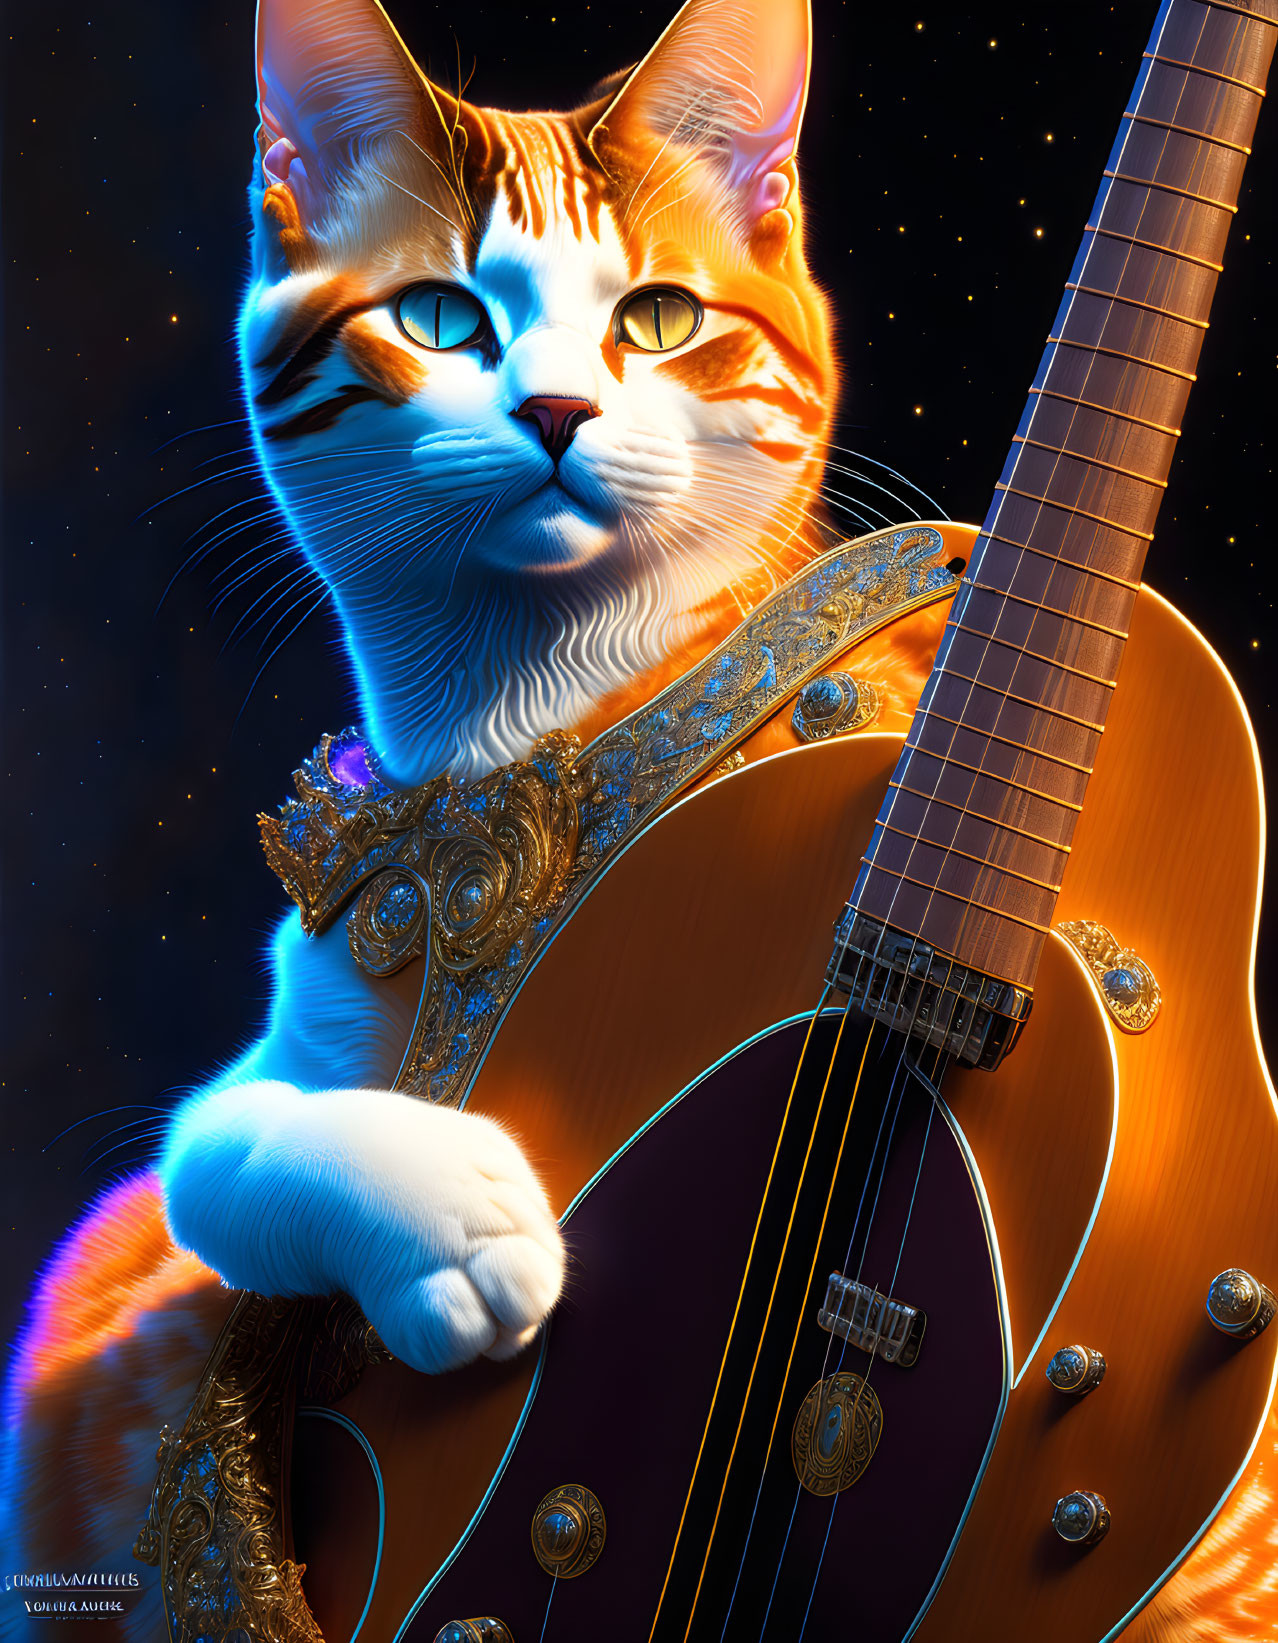 Colorful anthropomorphic cat digital art with guitar on starry backdrop